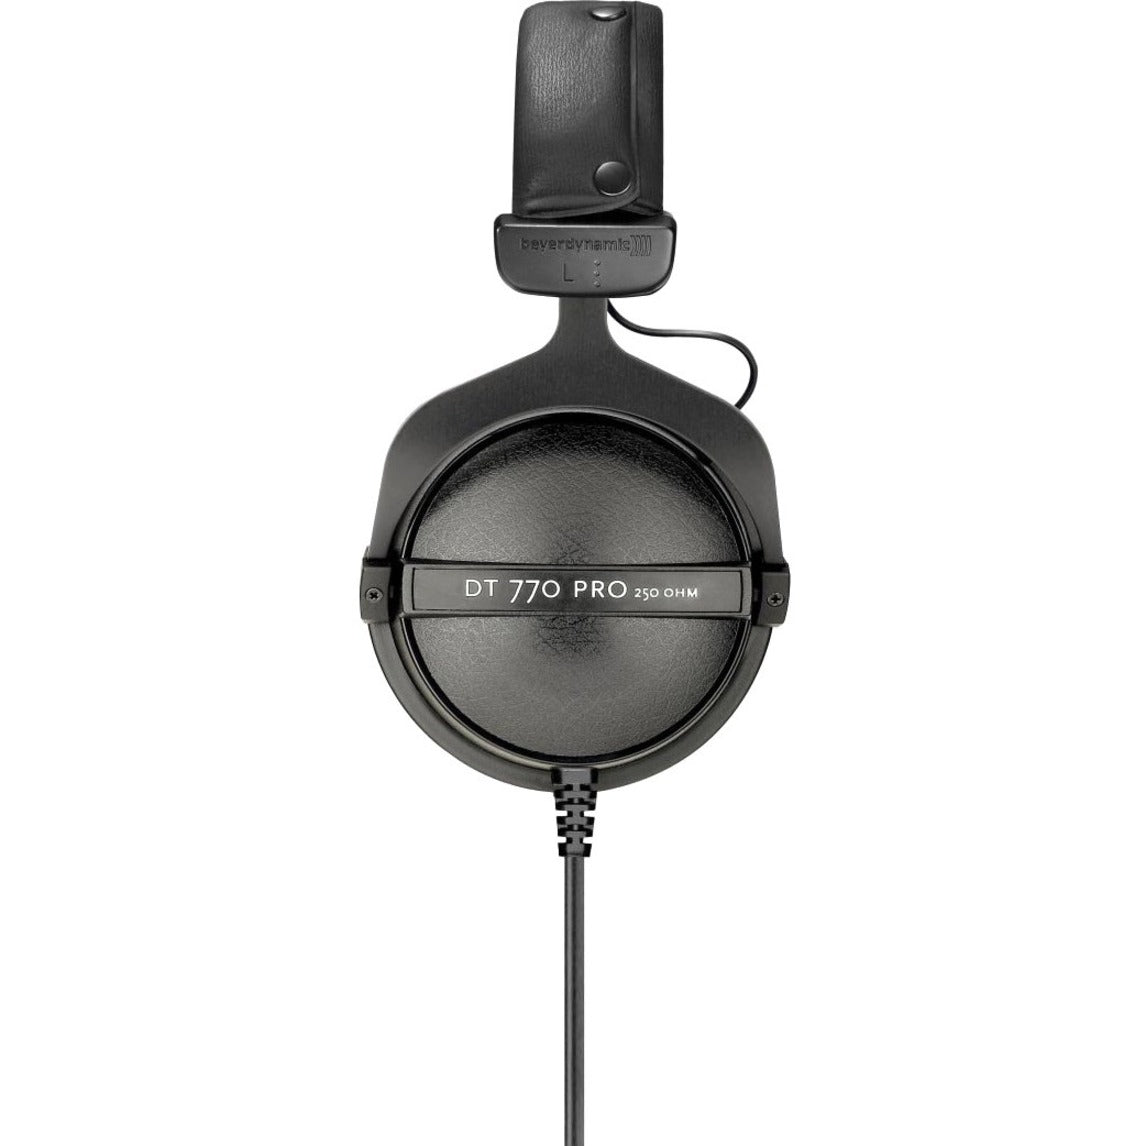 Beyerdynamic 474746 DT 770 PRO Dynamic Headphone, Over-the-head, 80 Ohm, Stereo, 9.84 ft Cable Length, Gold Plated Connector